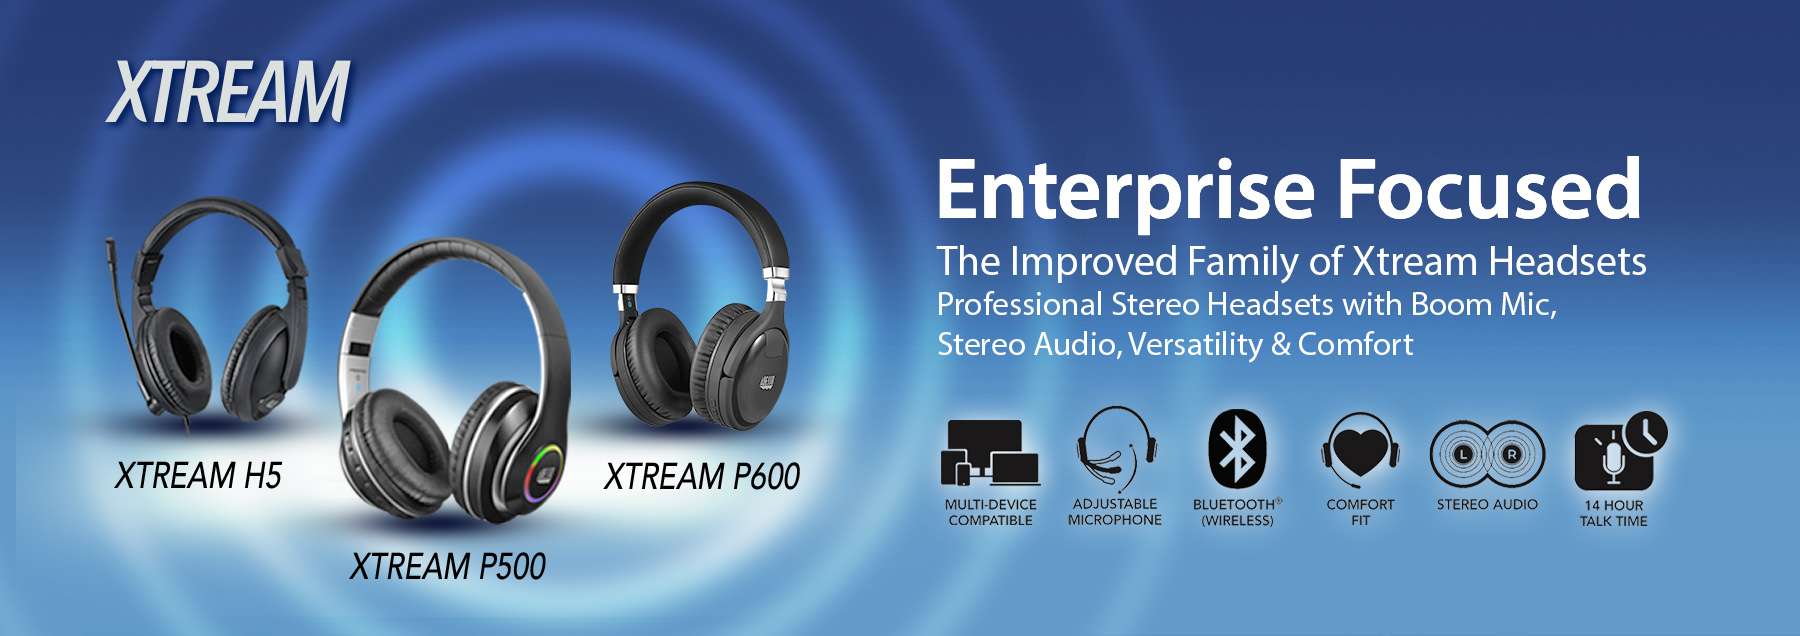 Adesso Xtream headsets